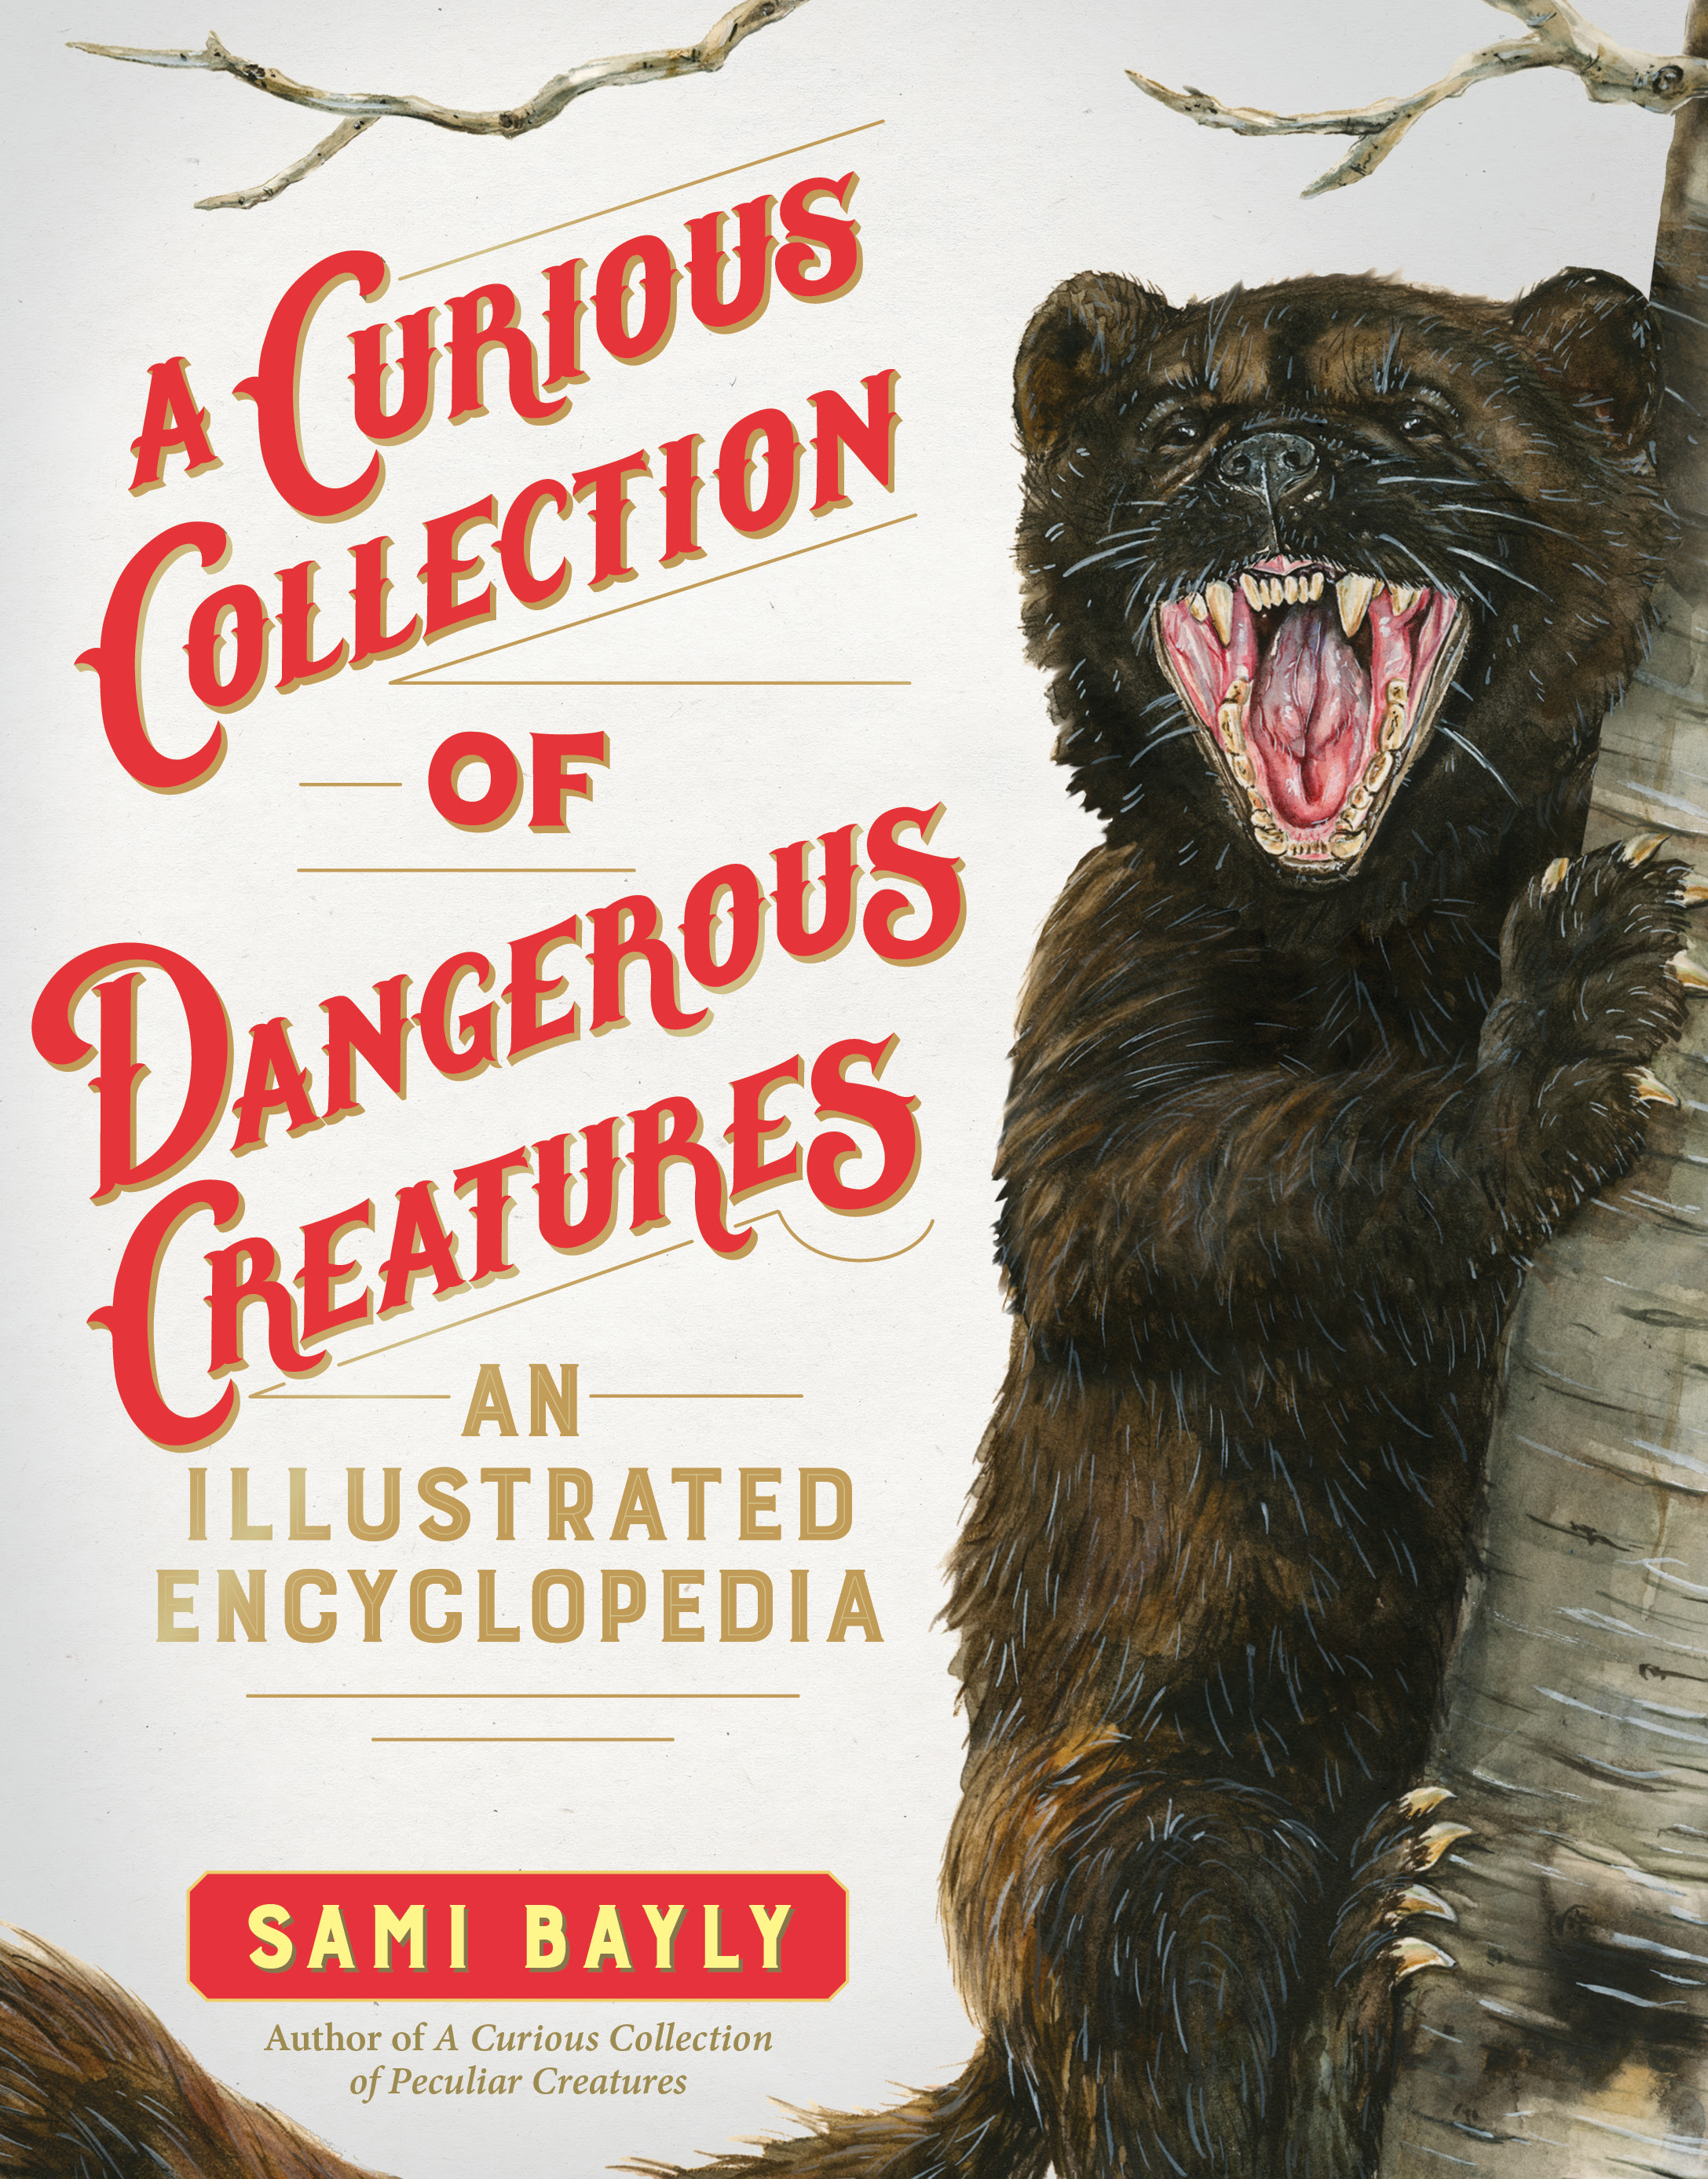 A Curious Collection of Dangerous Creatures: An Illustrated Encyclopedia EPUB